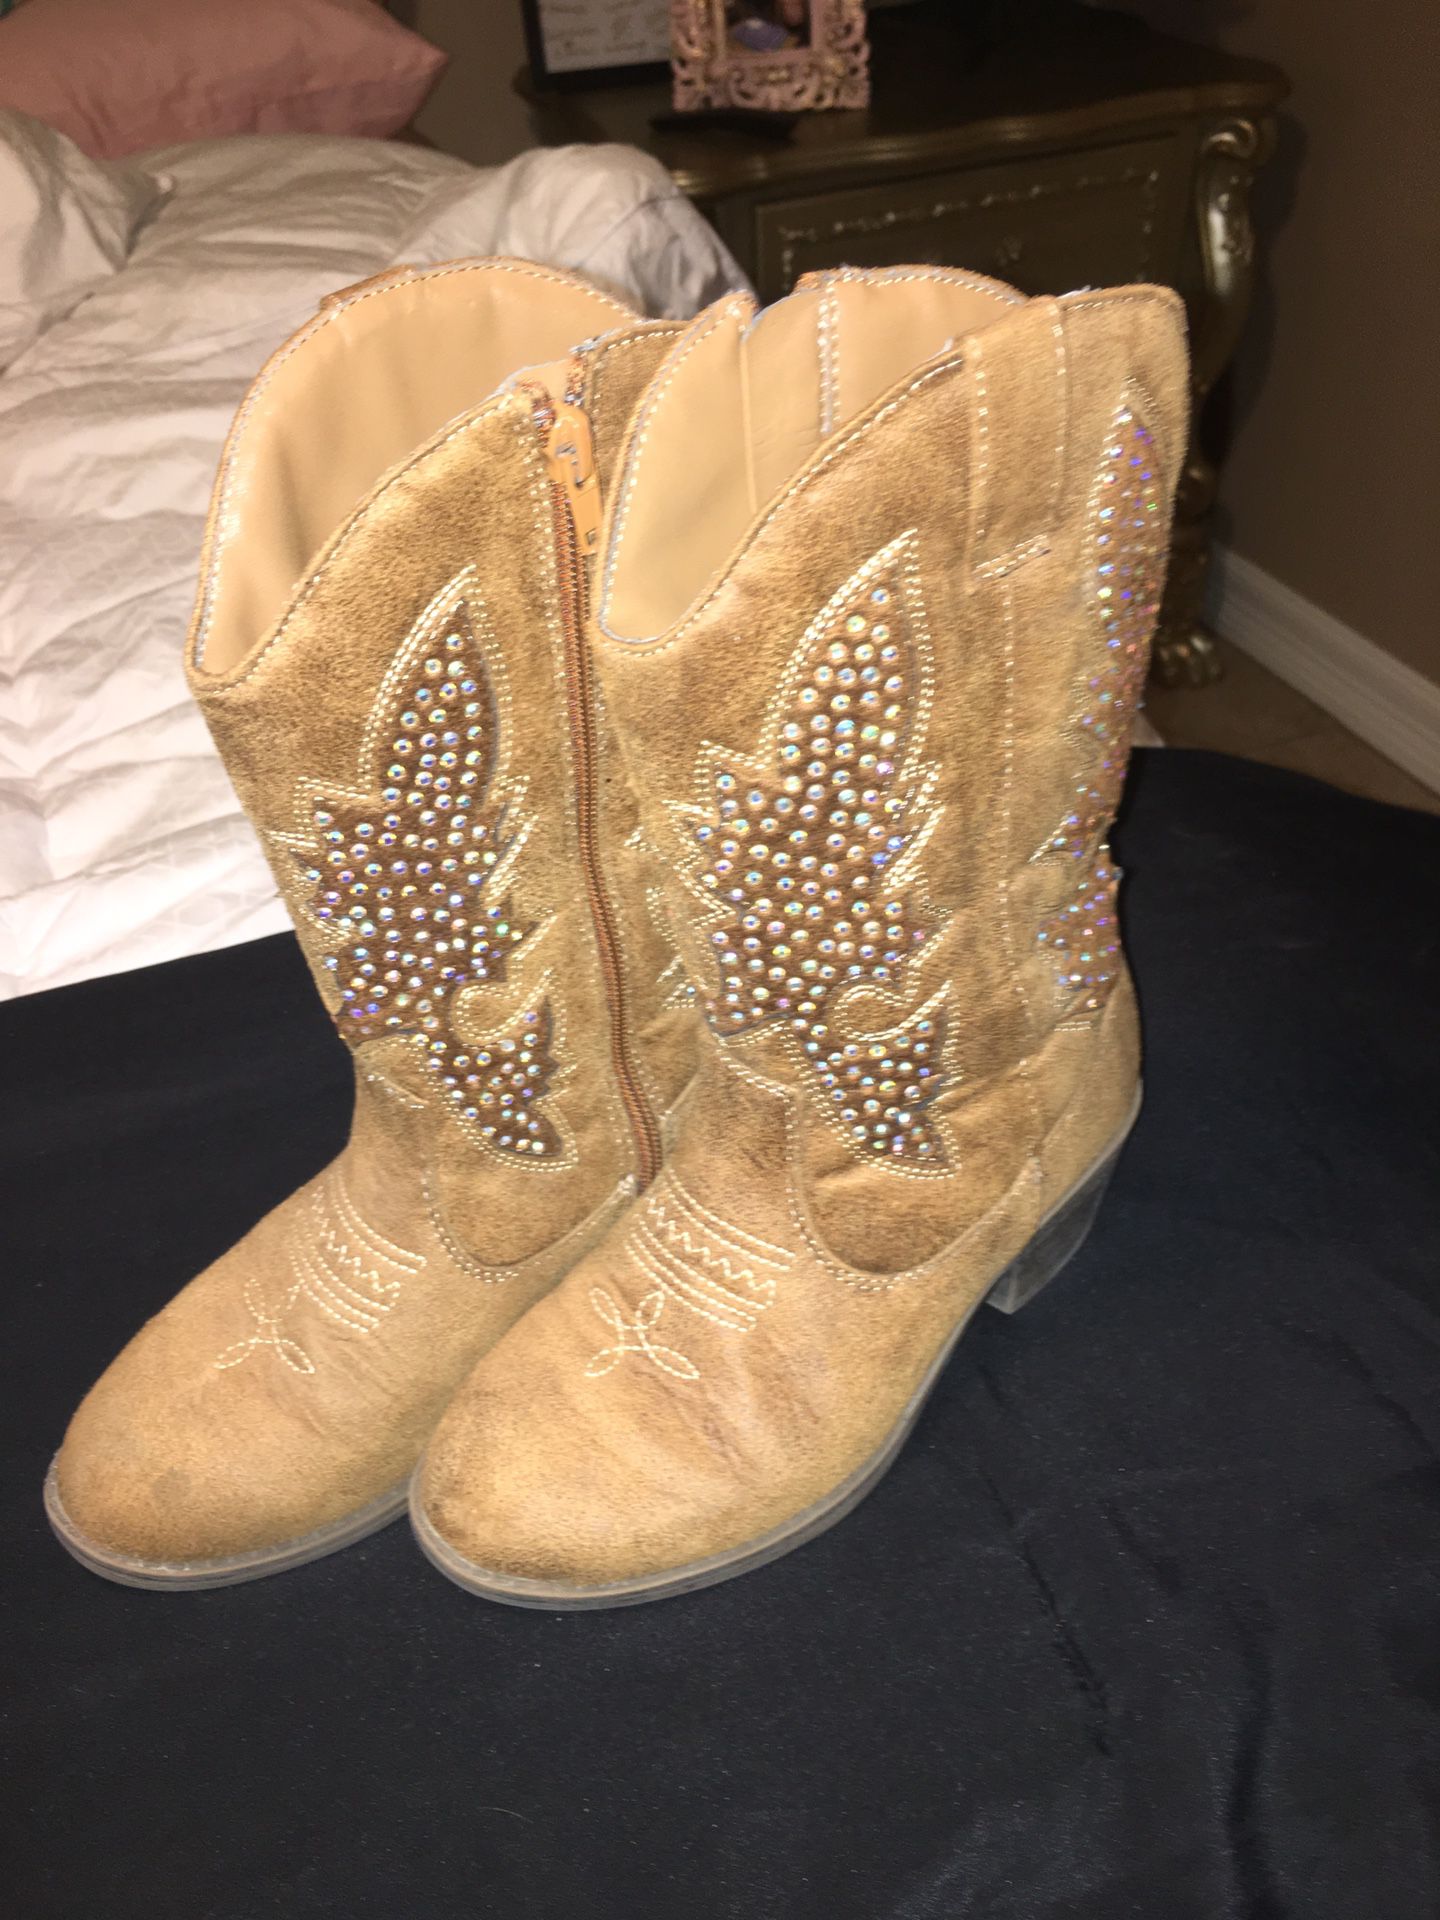 Girls justice boots sz 1